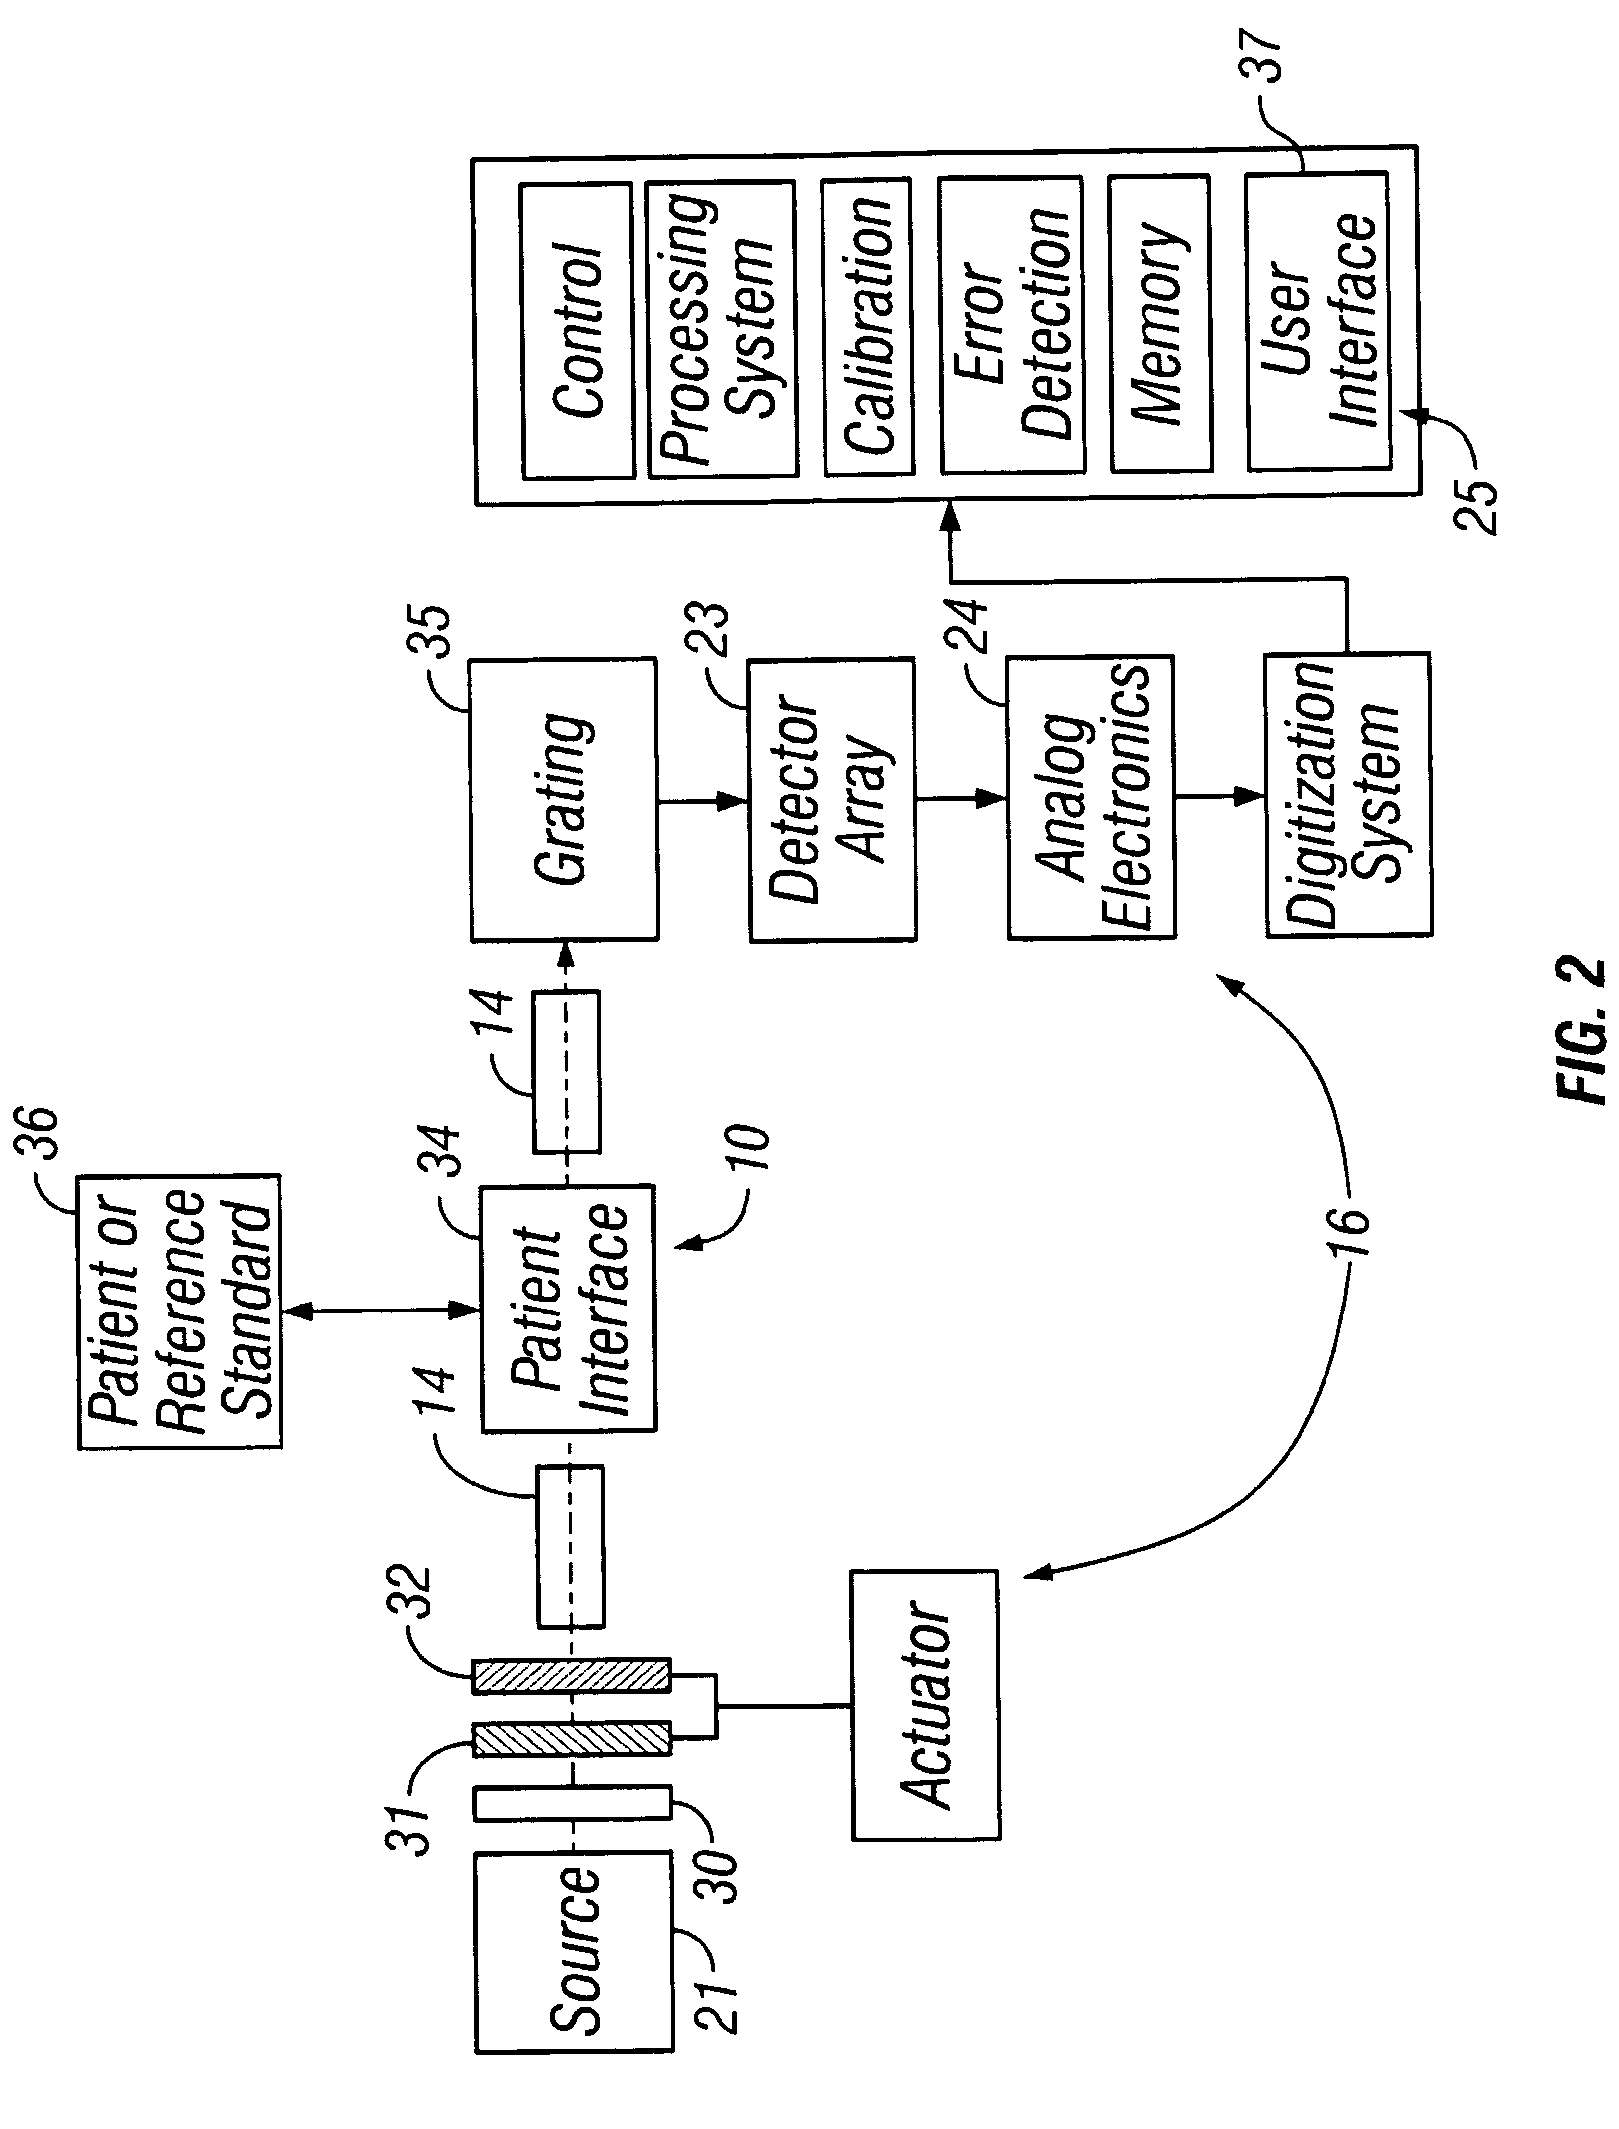 Compact apparatus for noninvasive measurement of glucose through near-infrared spectroscopy